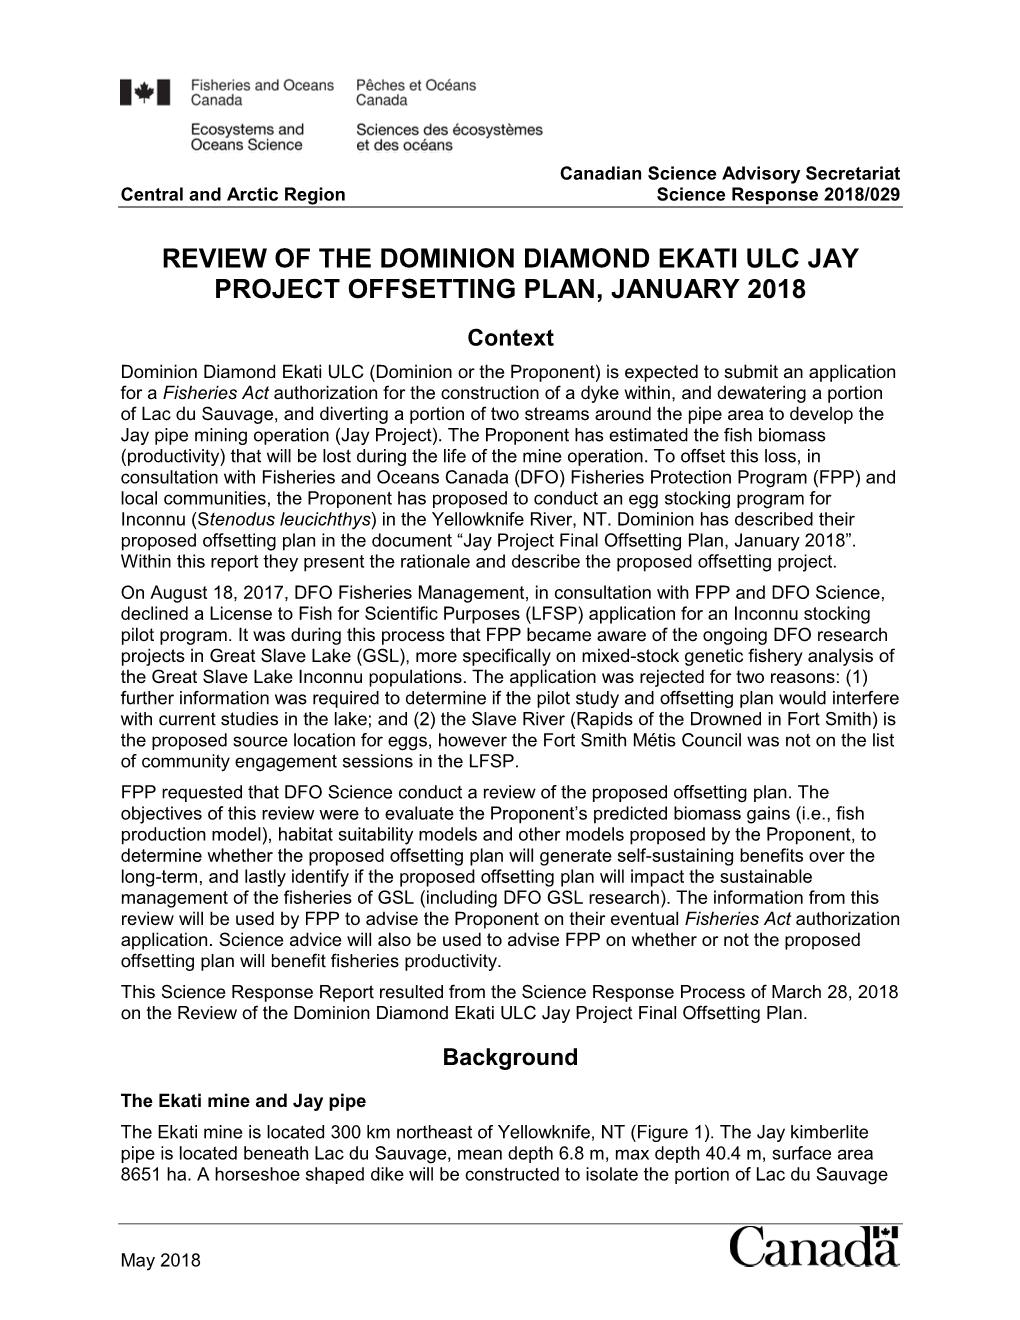 Review of the Dominion Diamond Ekati Ulc Jay Project Offsetting Plan